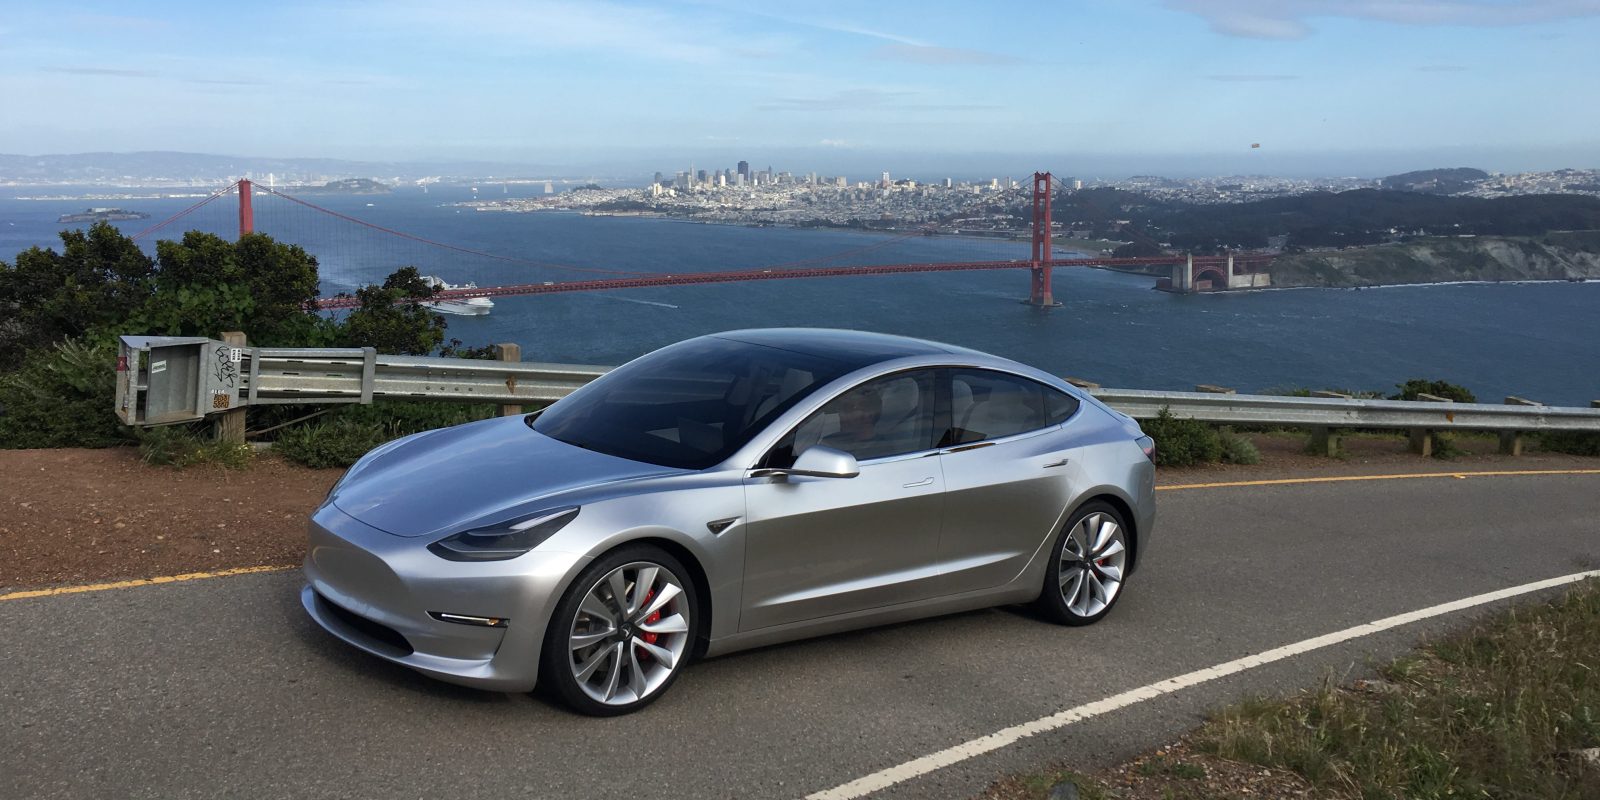 New Model 3: 2024 TESLA DRIVING FORWARD WITH FINE STYLE & INNOVATIVE CHANGES